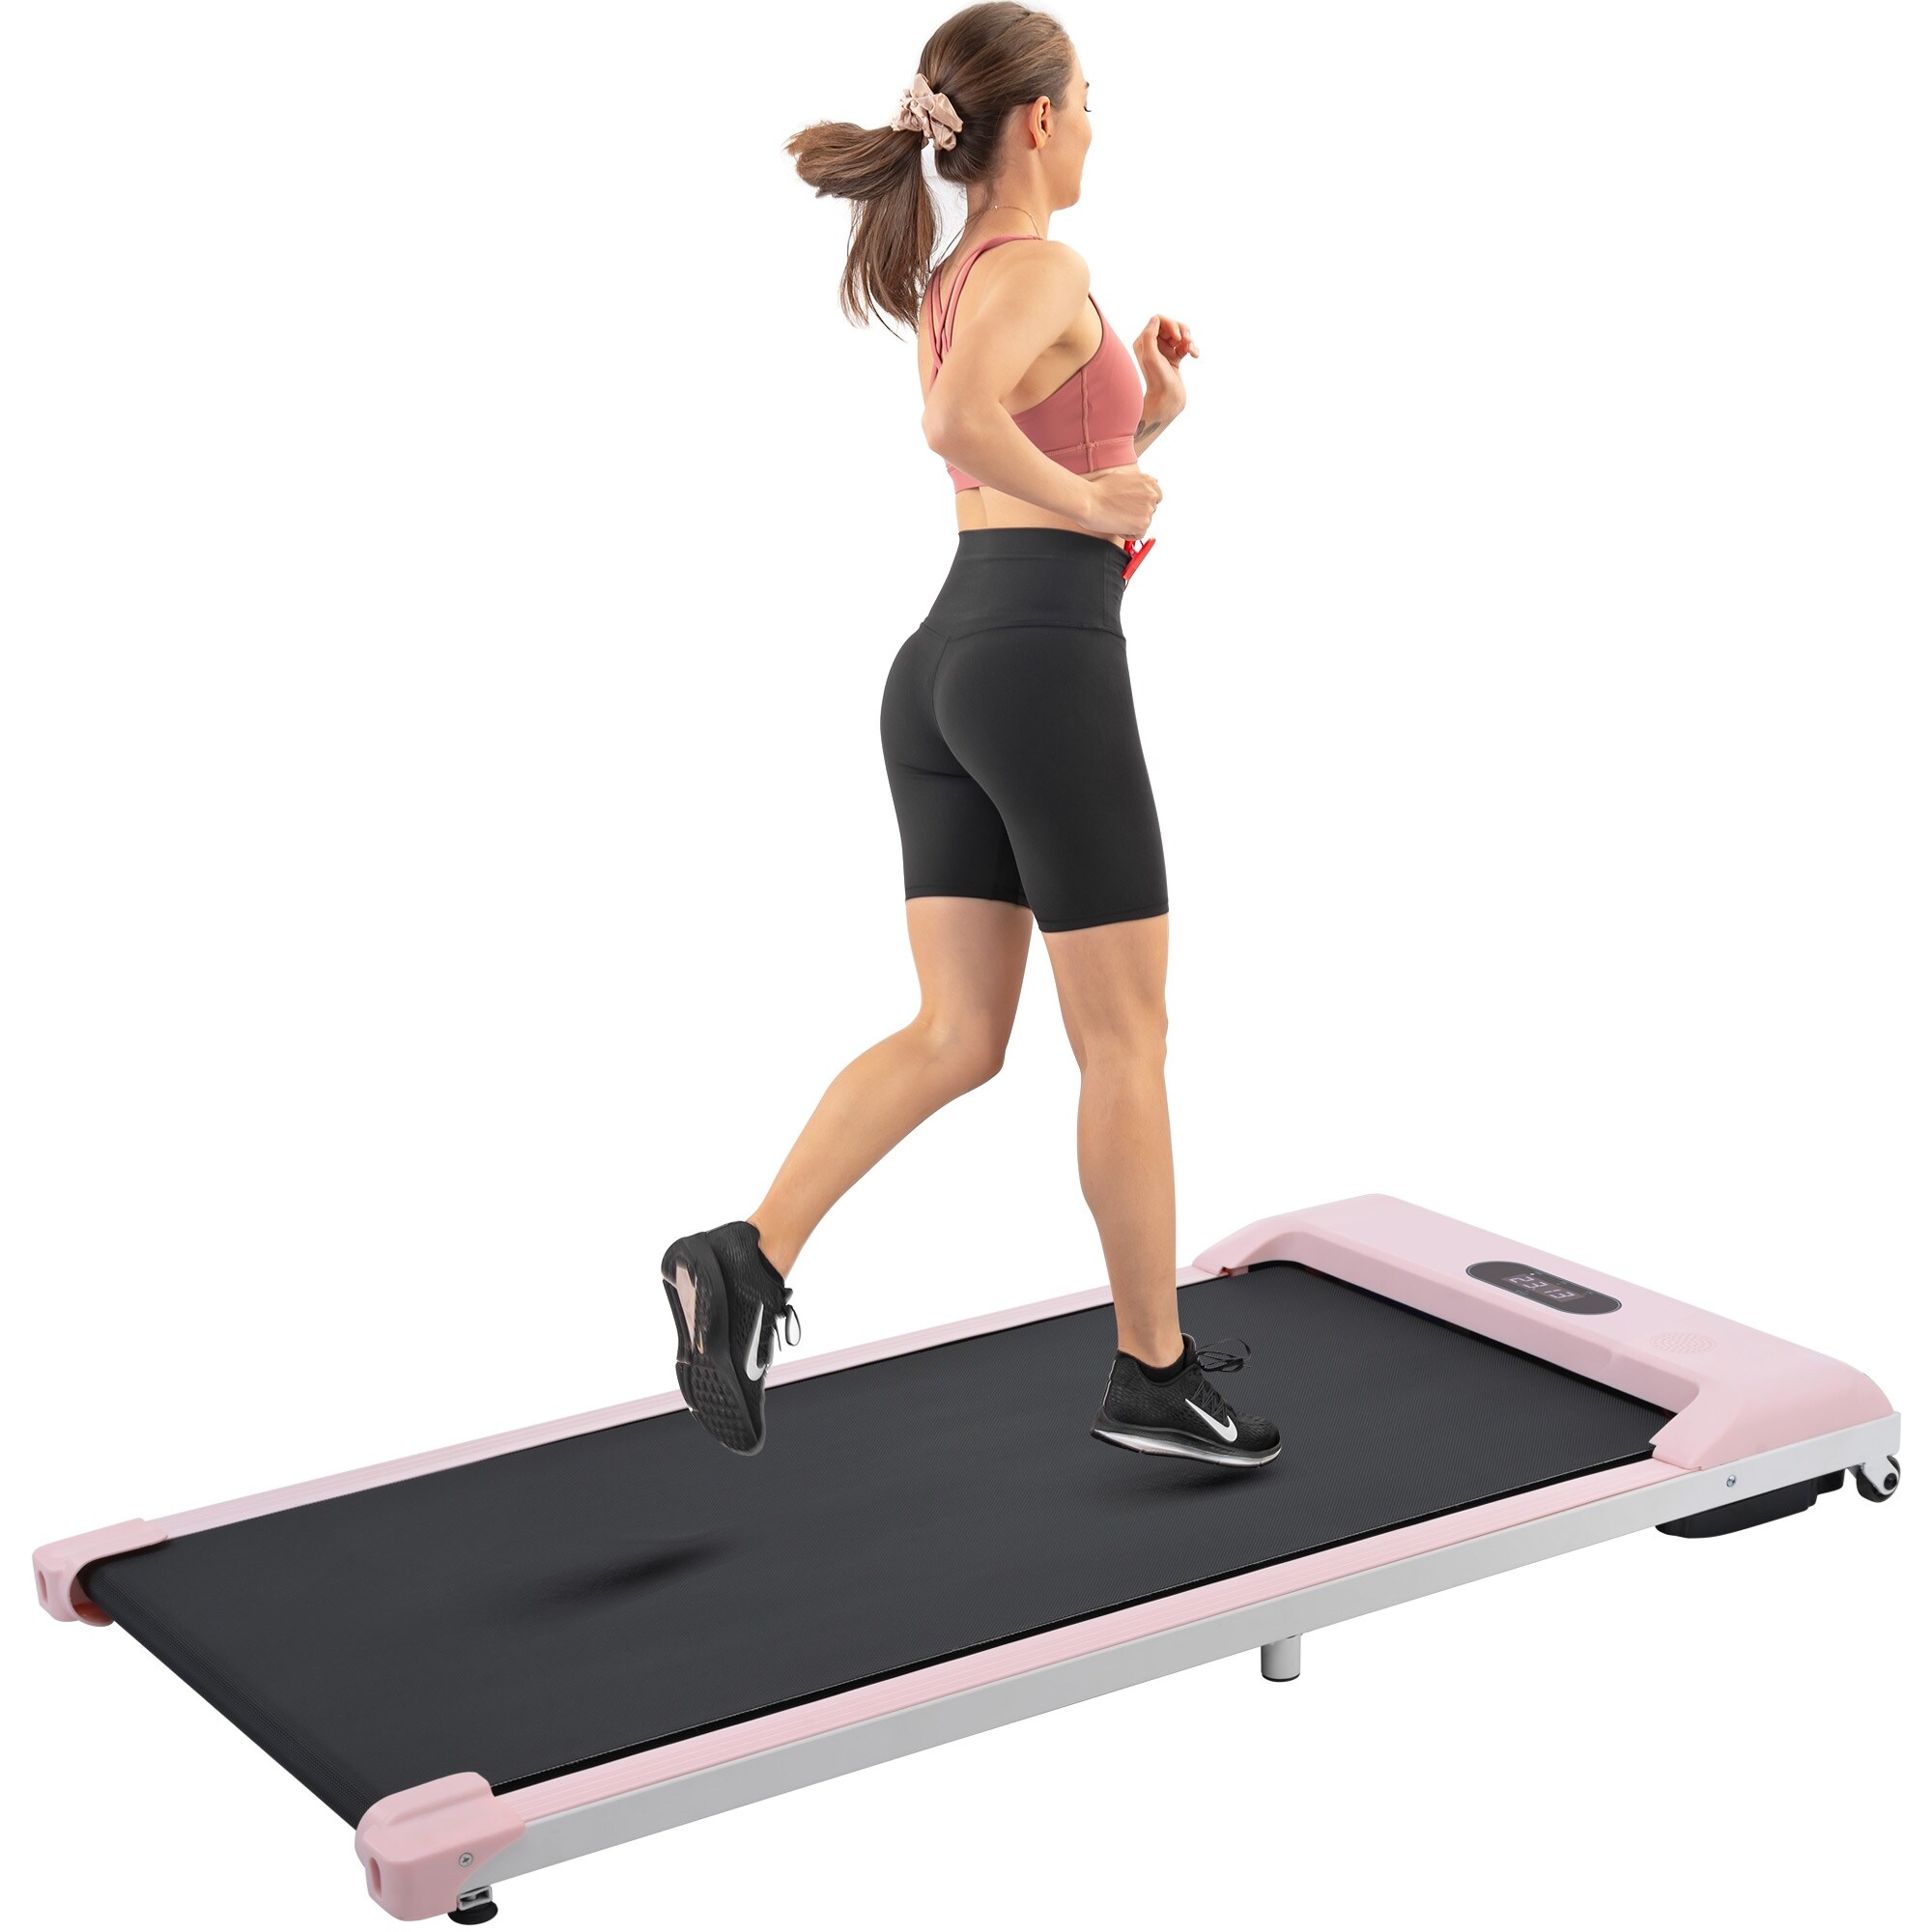 Home Fitness Code Treadmills for Home, Ultra Slim Under Desk Treadmill for  Home/Office, No Assembly Required, Pink